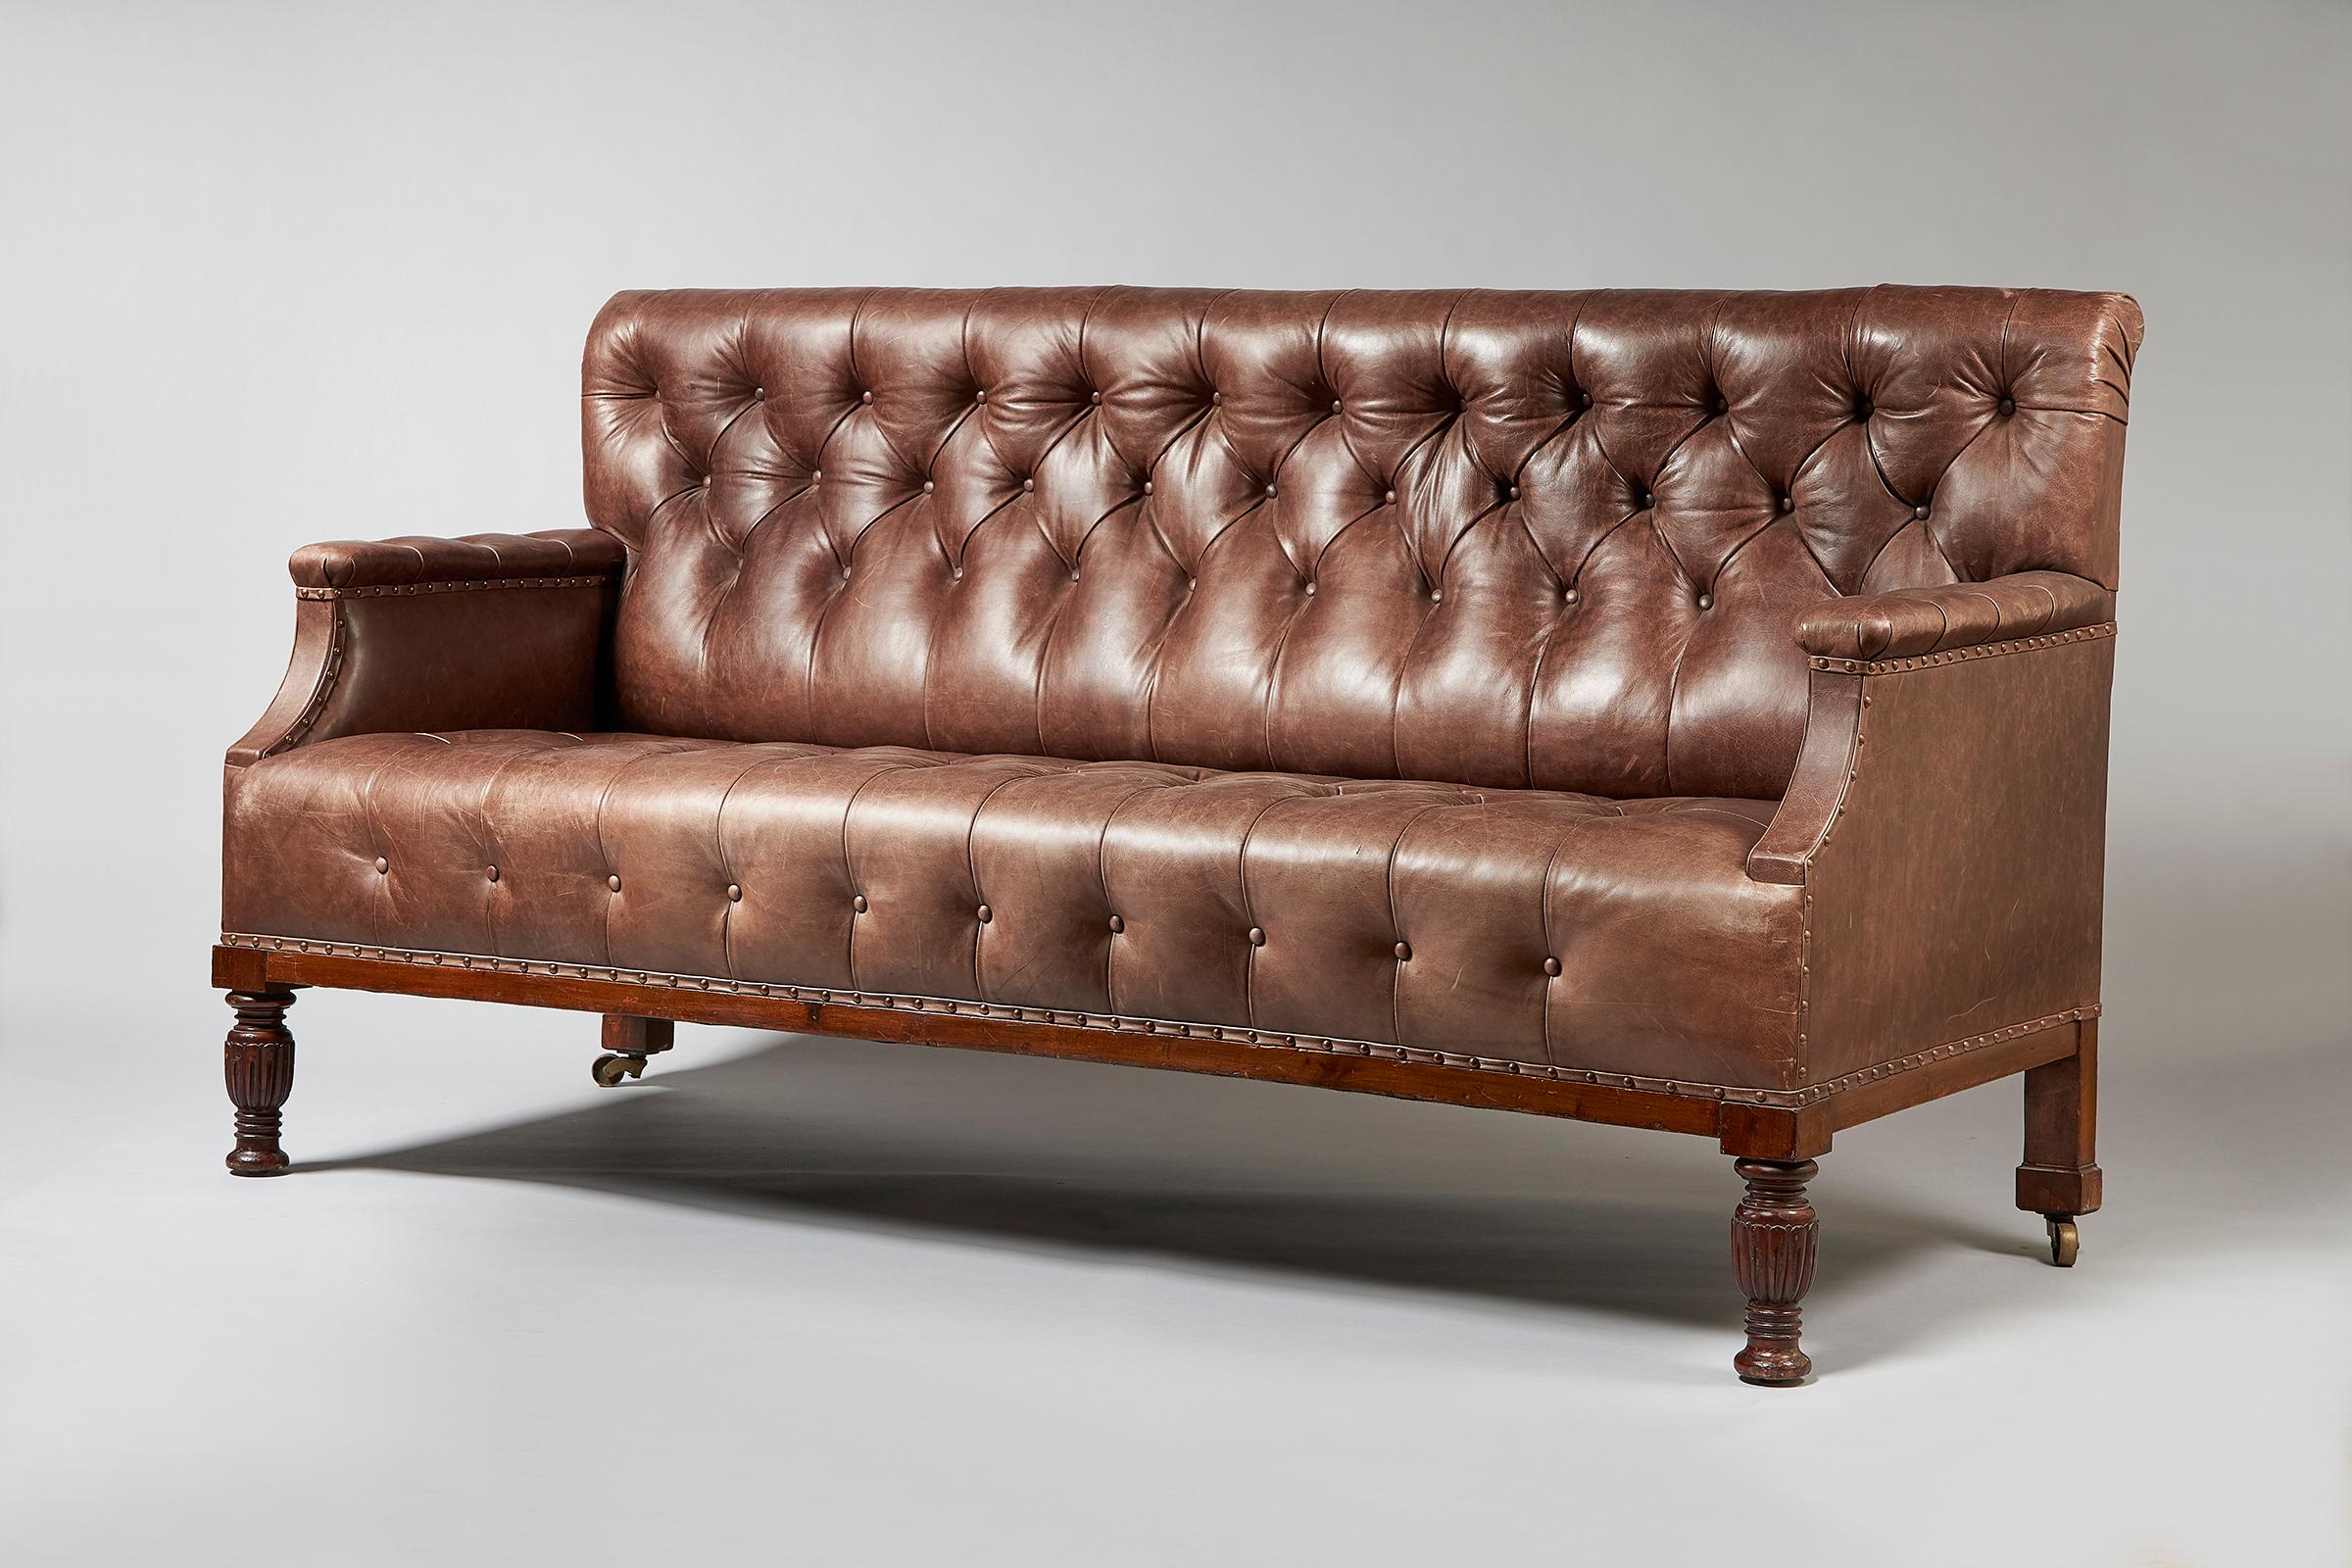 A George IV leather club sofa, early 19th century with straight back and arms, turned wood legs, upholstered in dark brown leather, button and stud detail.